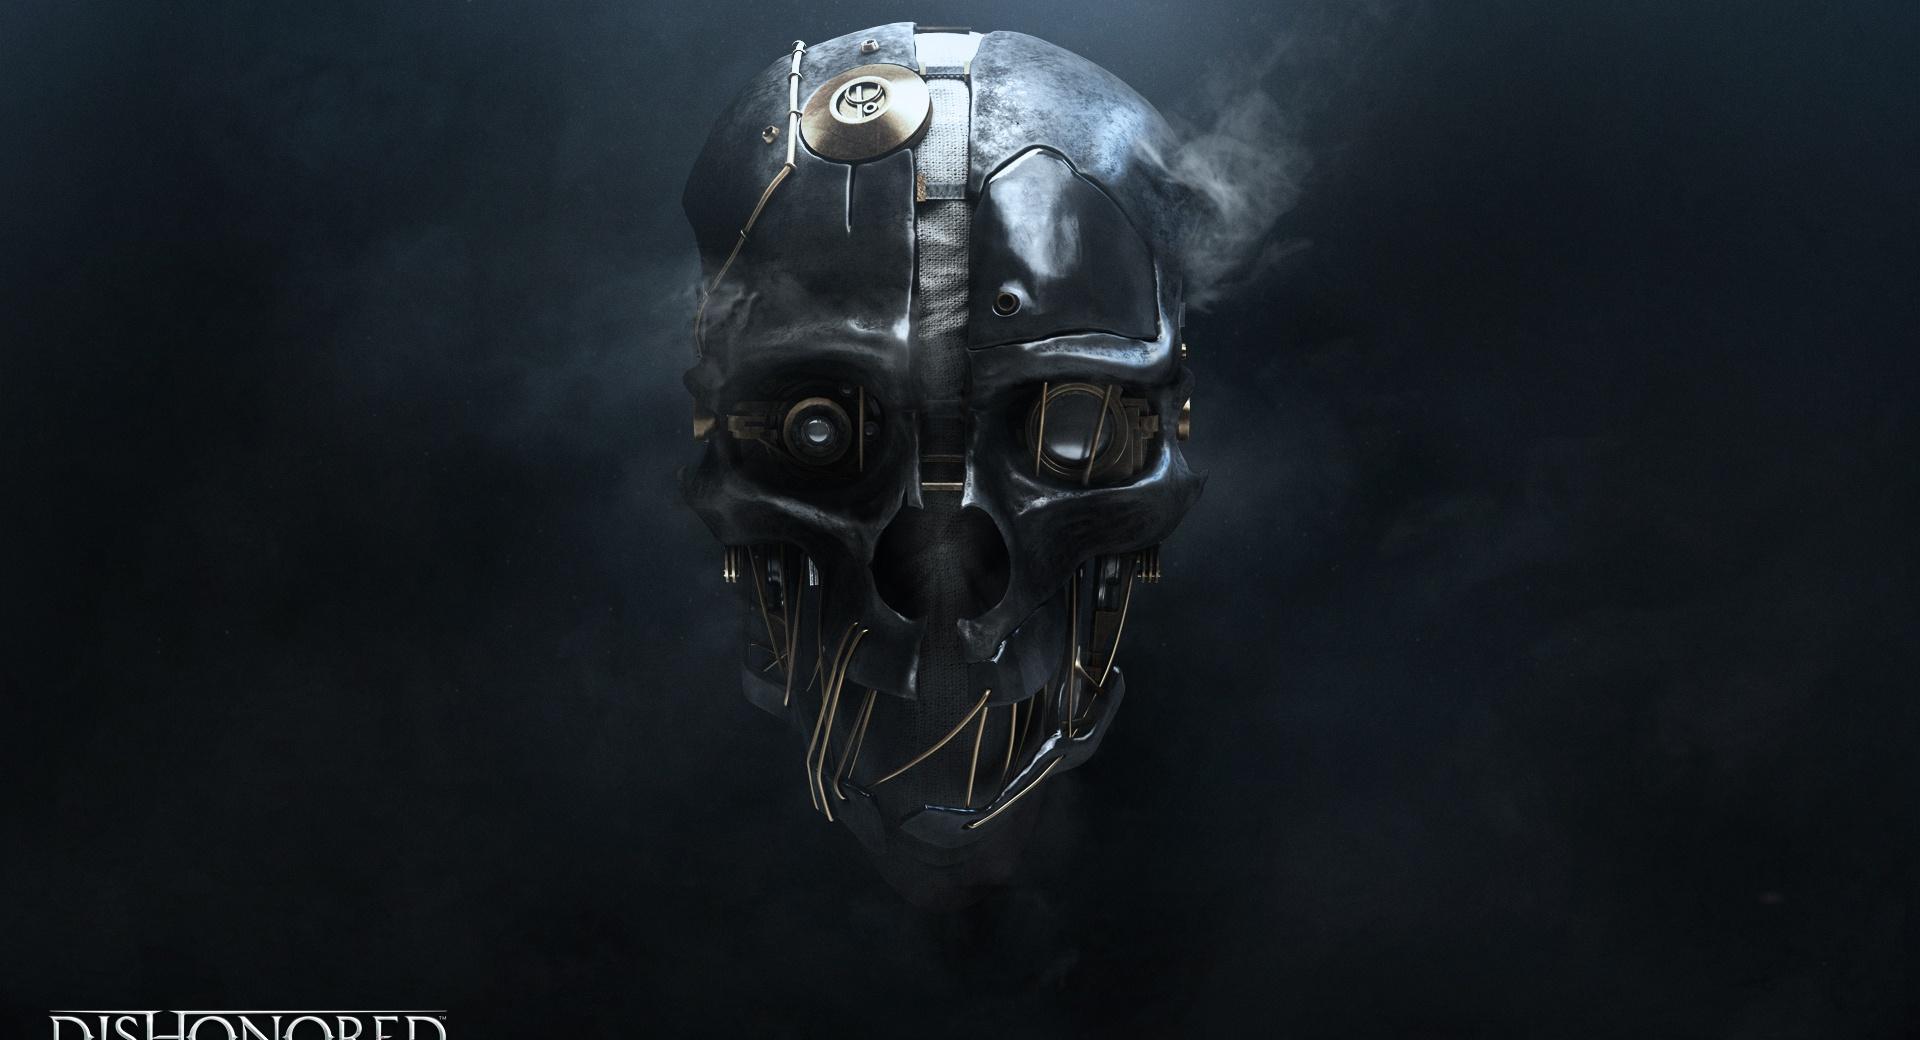 Dishonored Mask (2012 Video Game) wallpapers HD quality